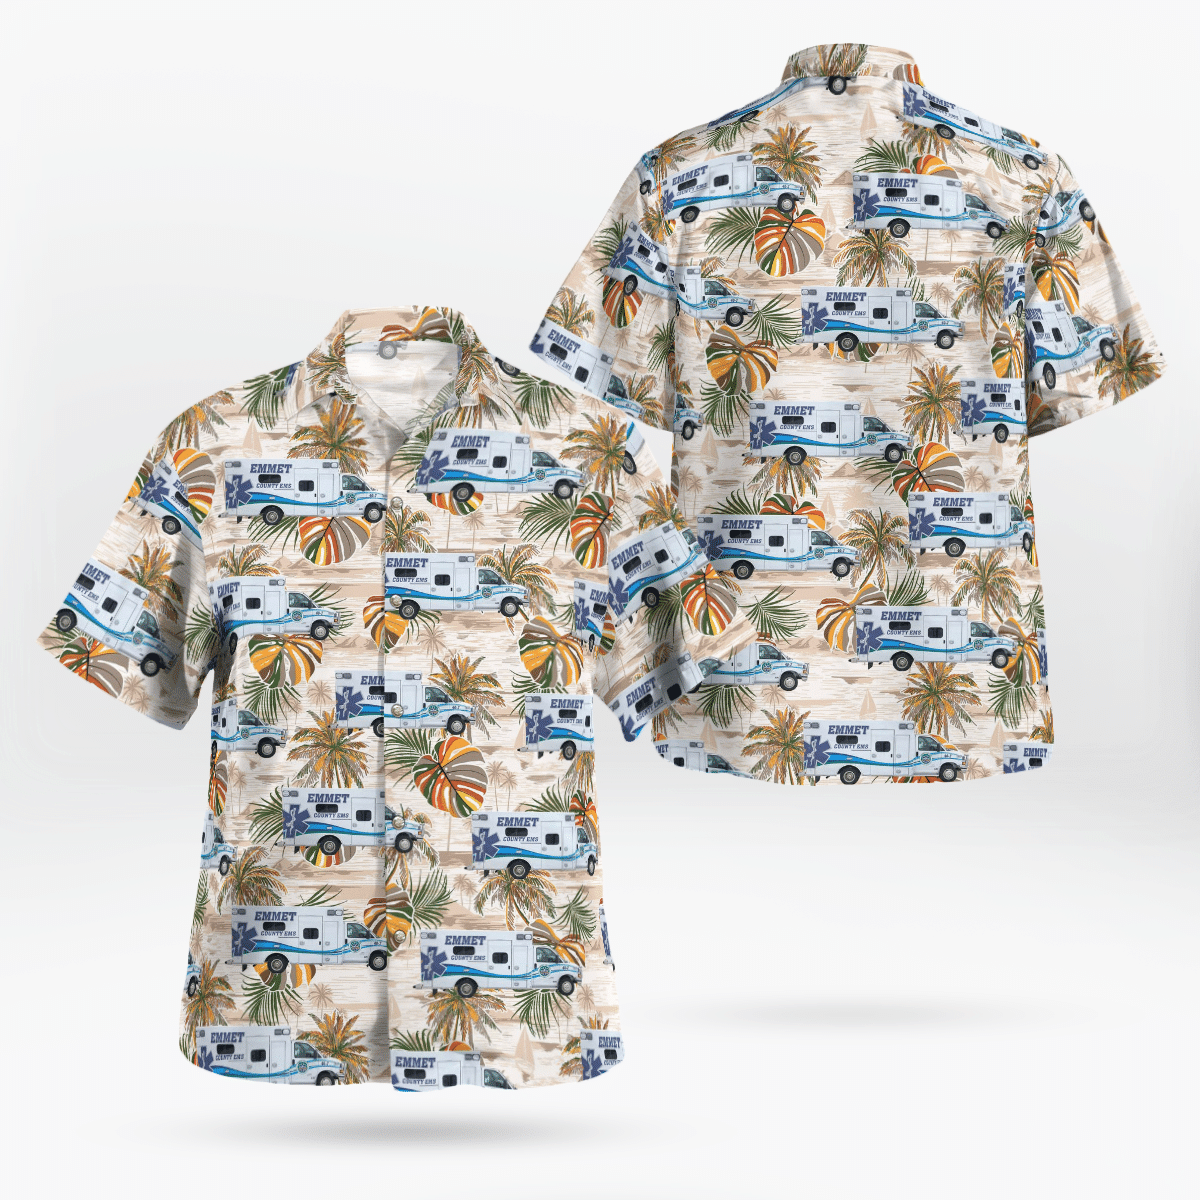 If you want to be noticed, wear These Trendy Hawaiian Shirt 82